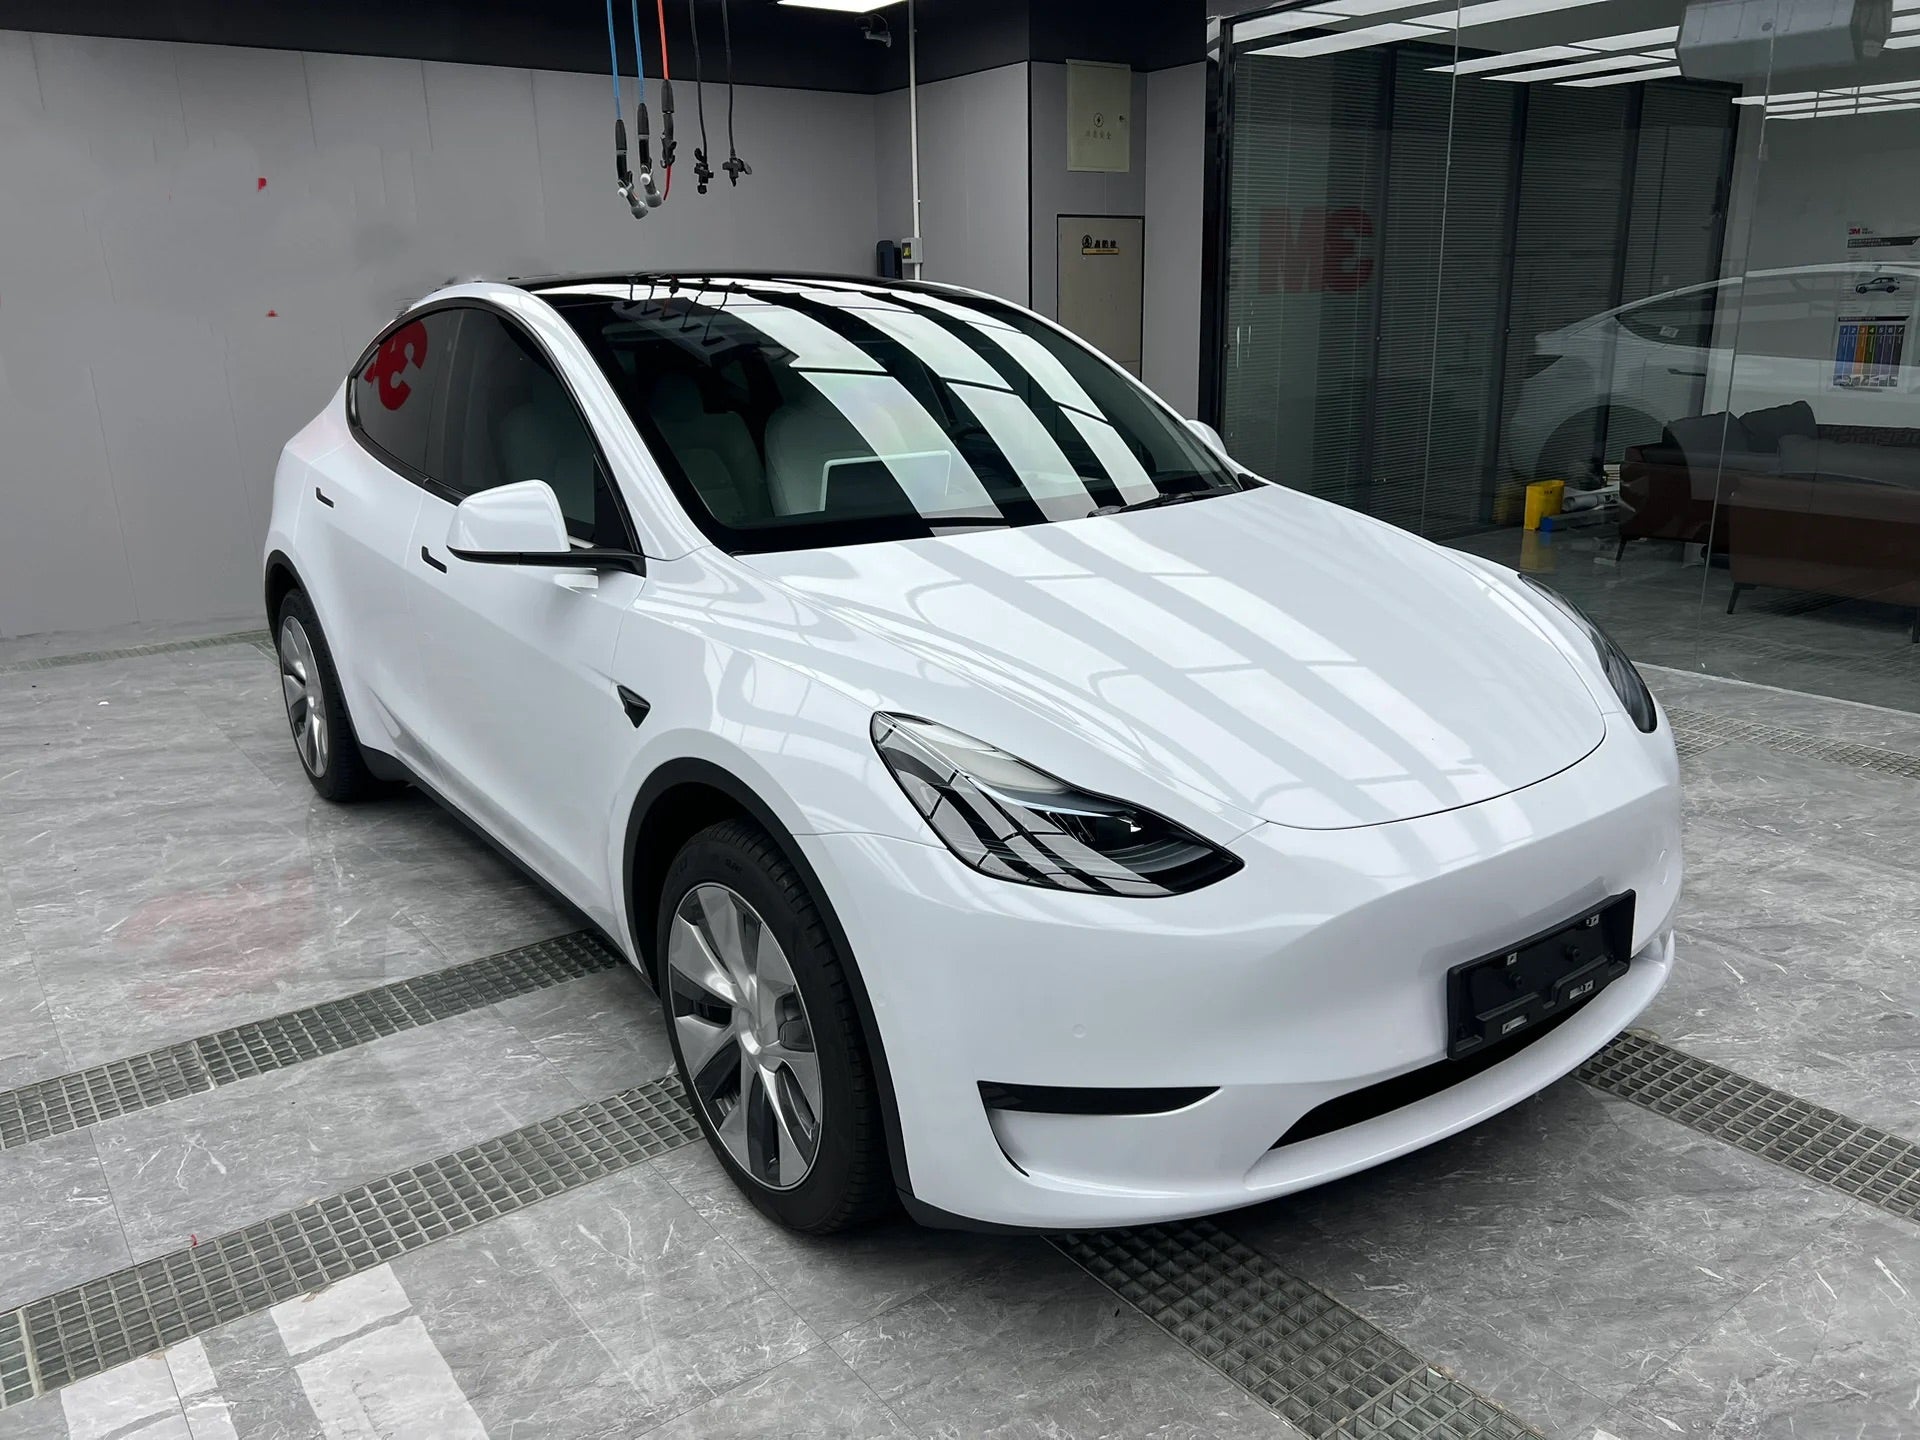 Carlori Pearl White Vinyl Wrap without bubbles, suitable for whole vehicle  wrapping